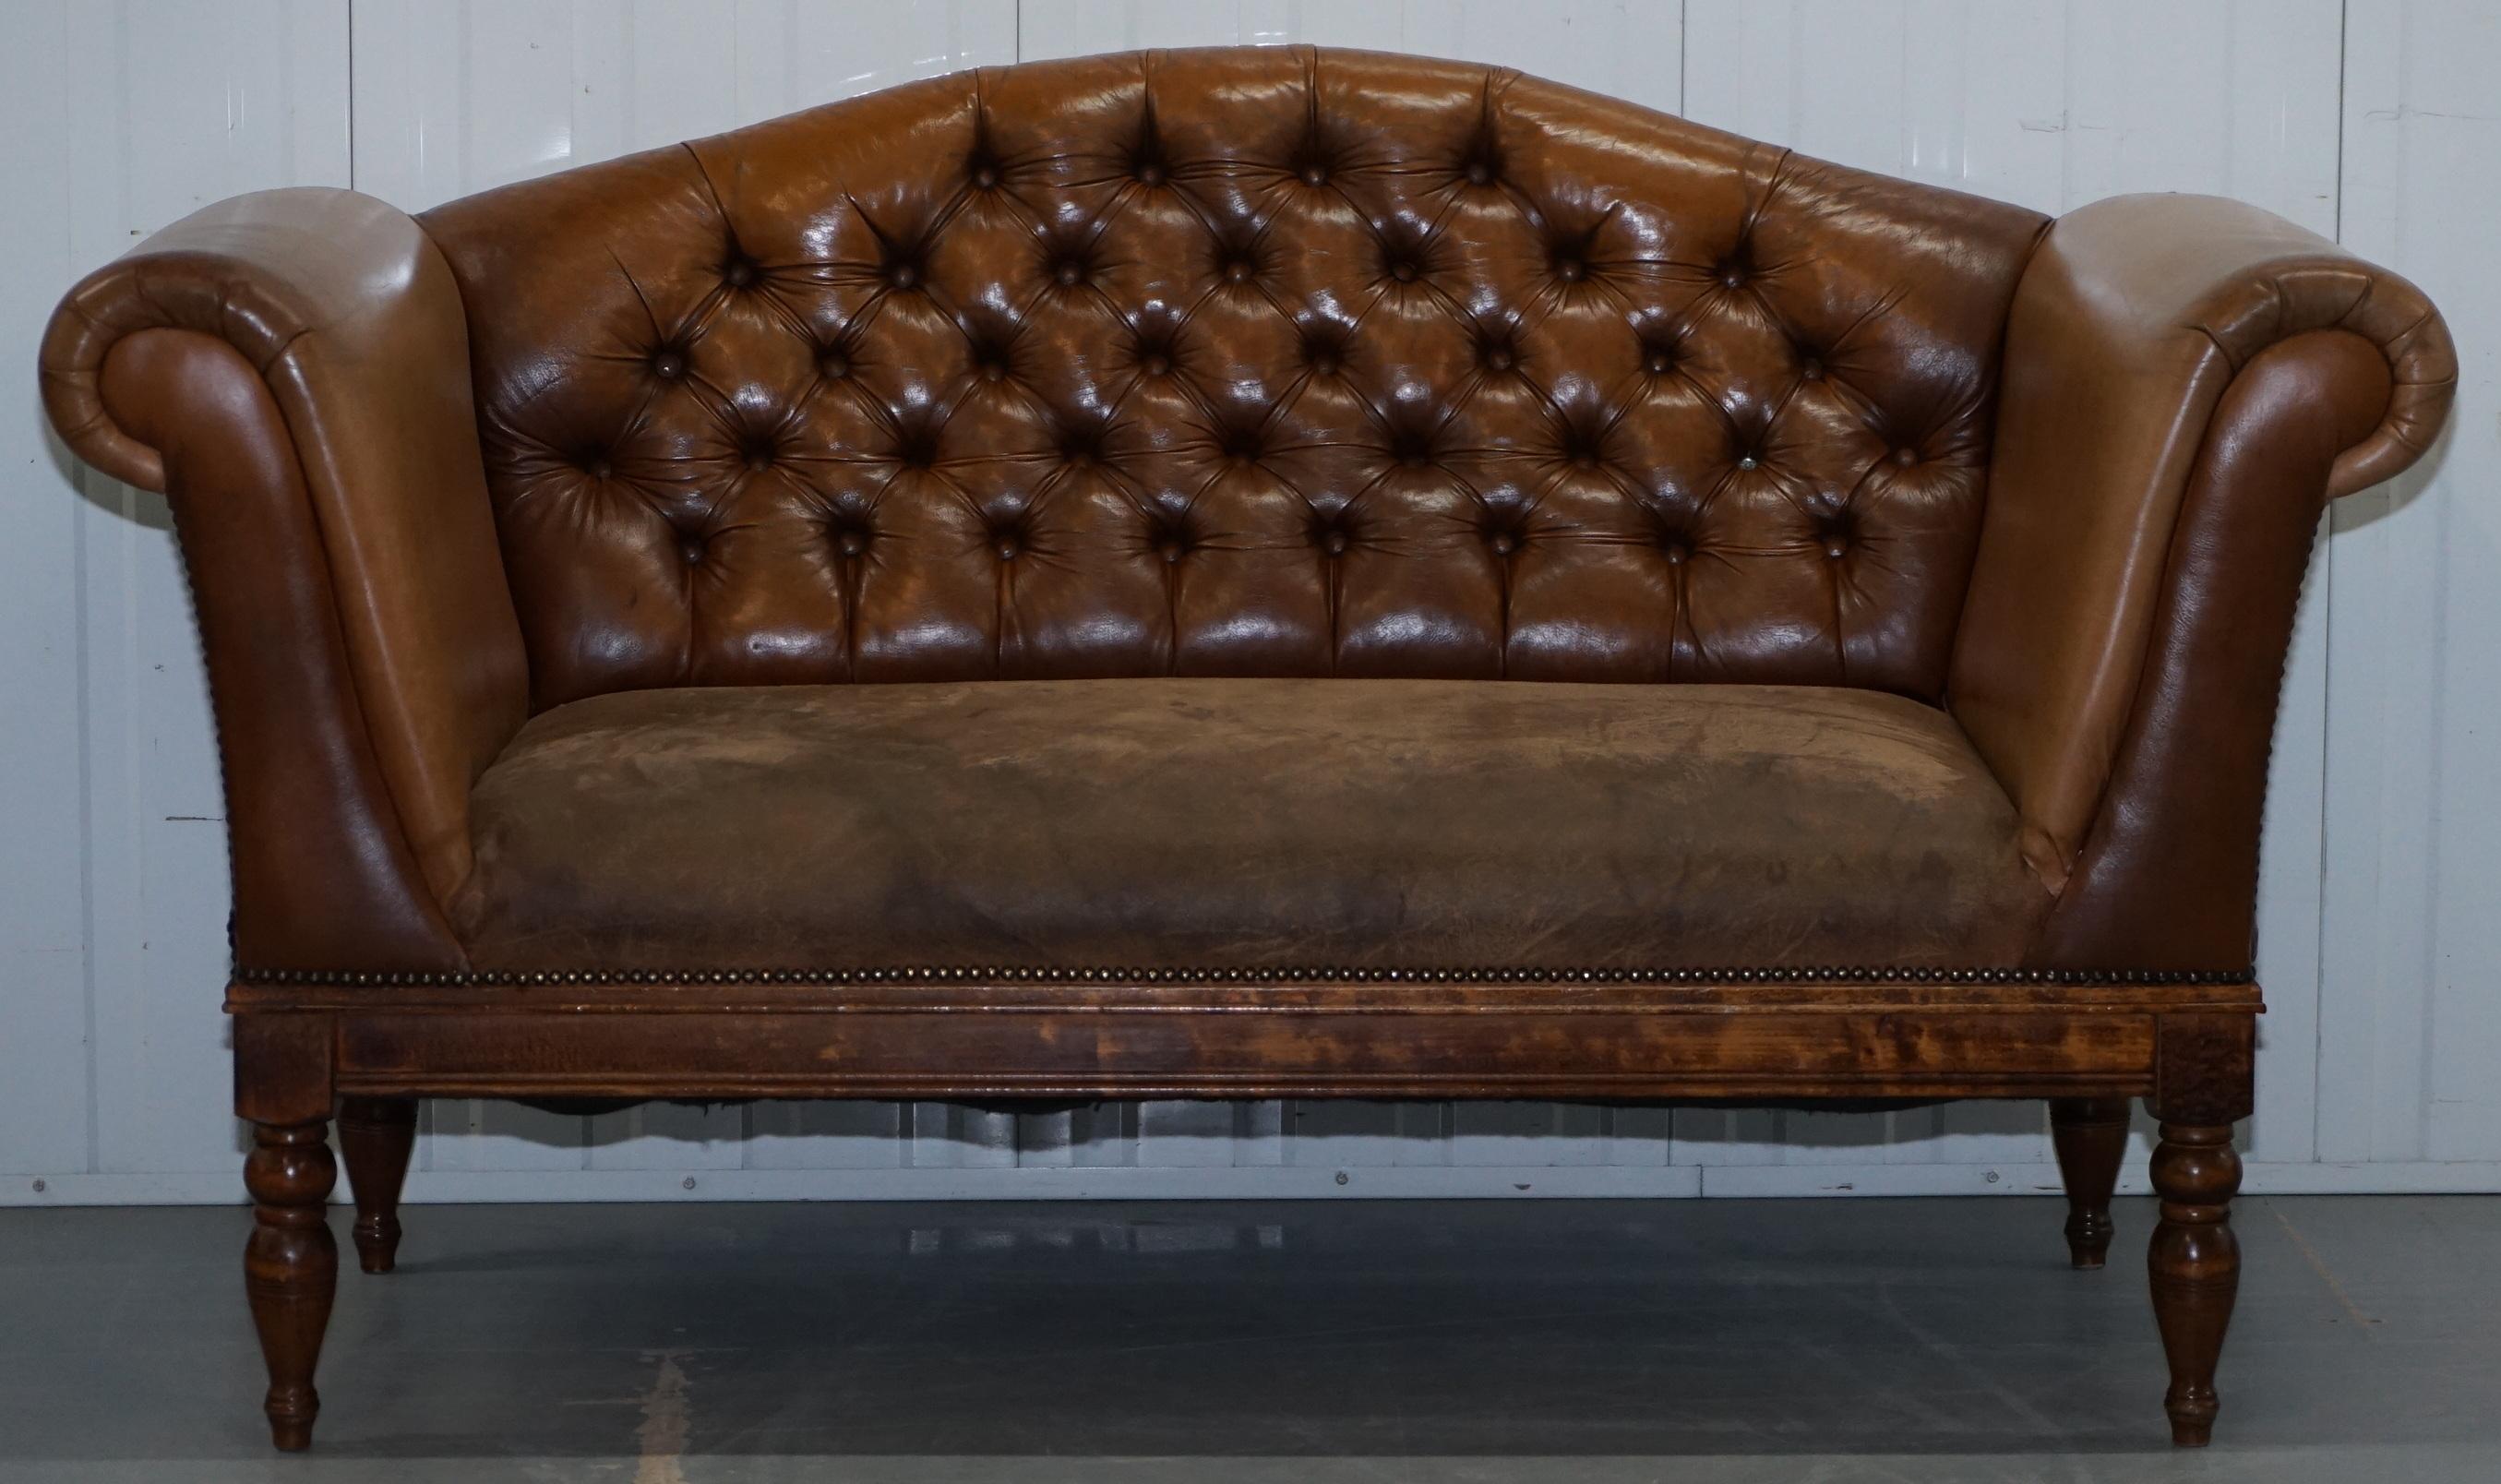 We are delighted to offer for sale this interesting mixed brown leather Chesterfield buttoned club sofa with suede leather base.

A nicely sized decorative piece with quite a sculptural frame, the leather on the arm’s front panels and back and